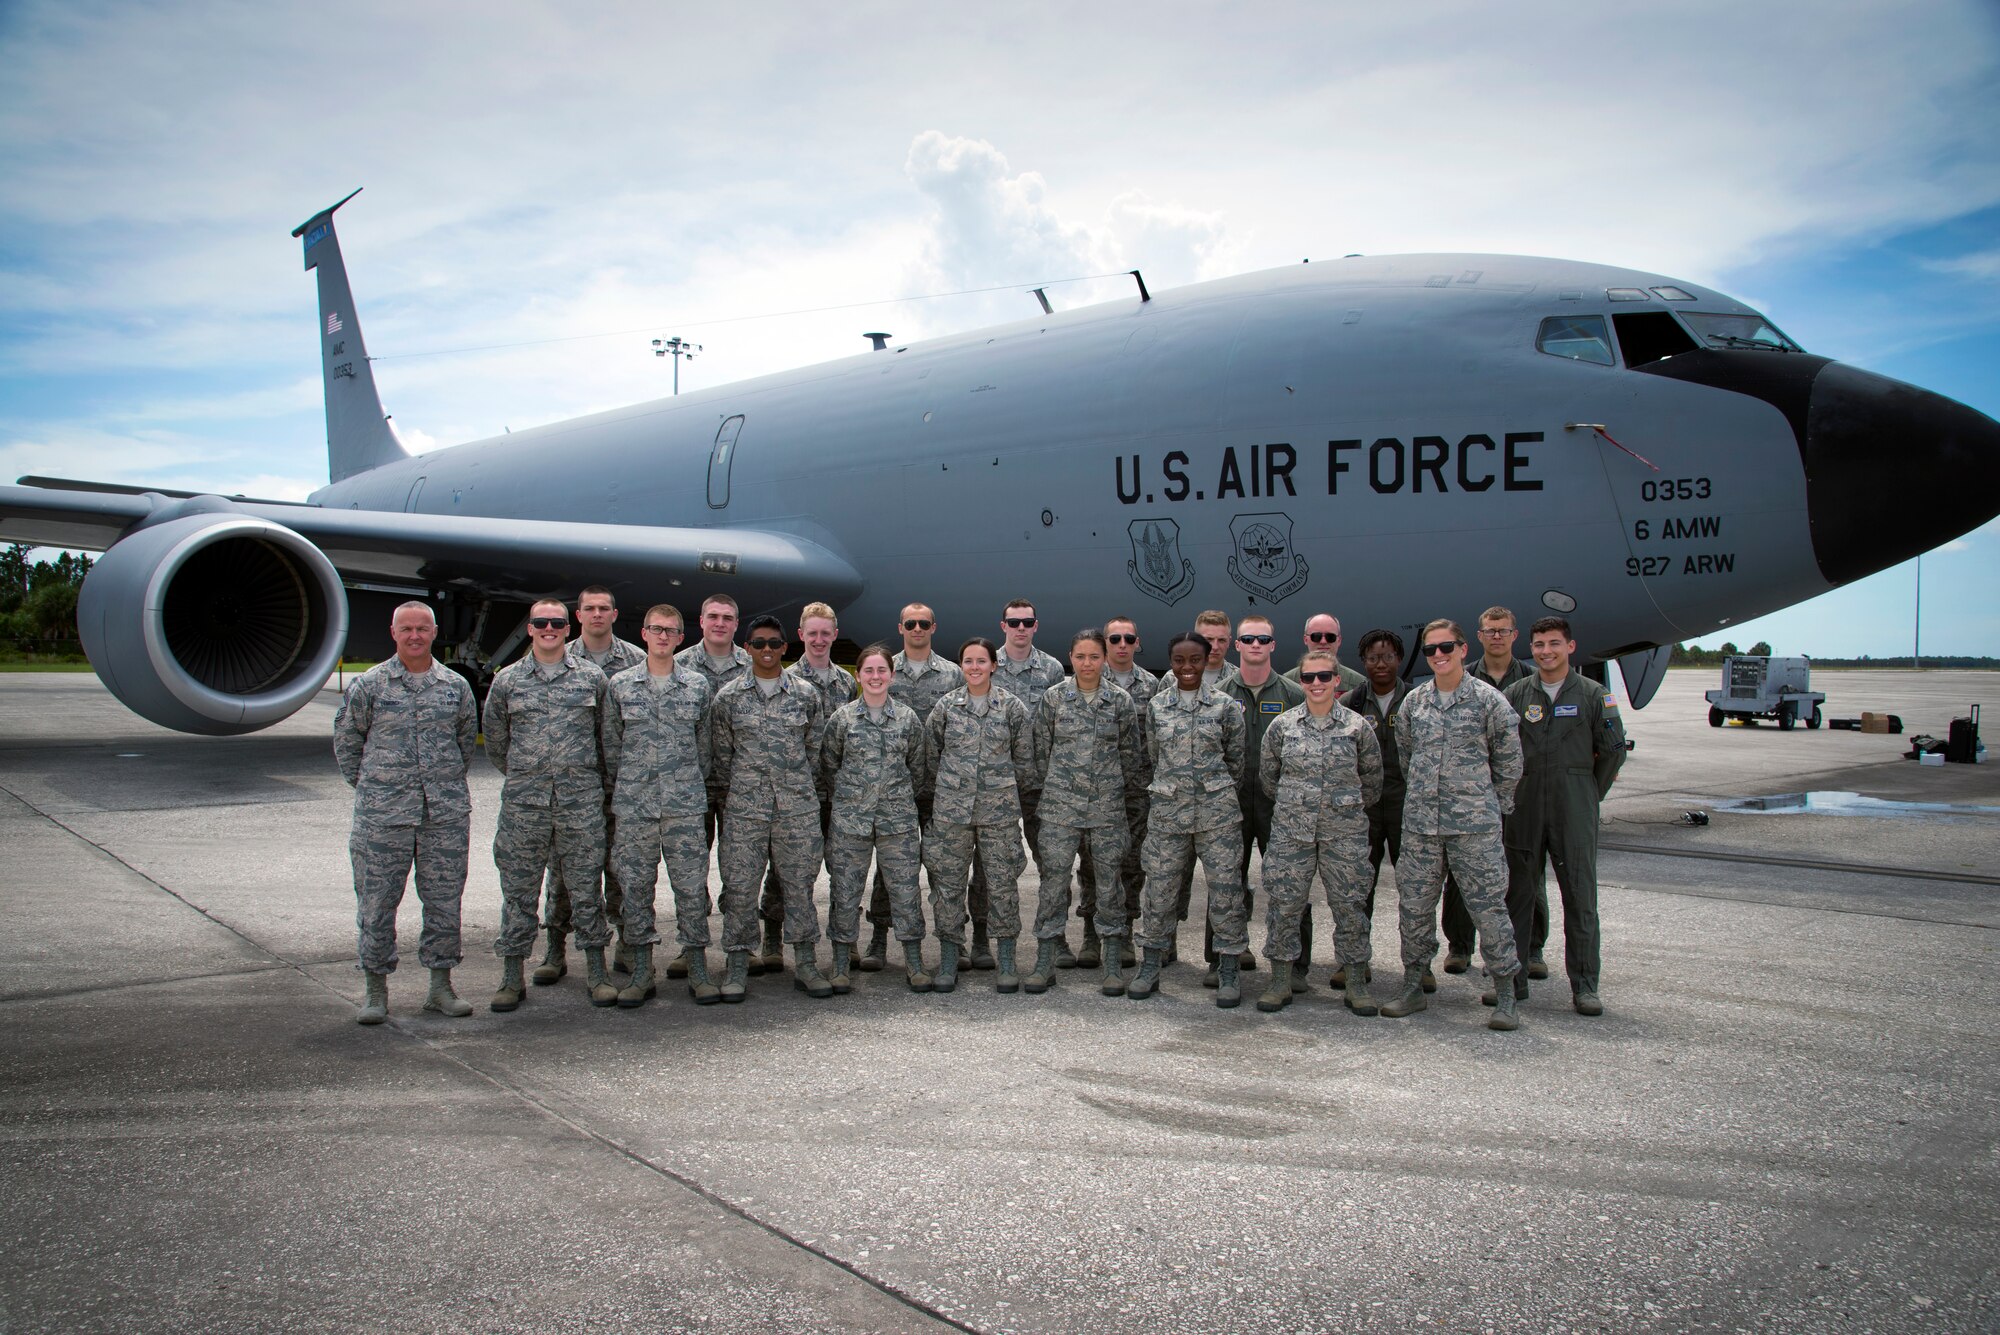 U.S. Air Force Reserve Officer Training Corps (ROTC) cadets pause for a photo with Chief Master Sgt. Michael Lemond, the superintendent assigned to the 6th Mission Support Group, along with KC-135 Stratotanker aircrew at MacDill Air Force Base, Fla., June 14, 2018.